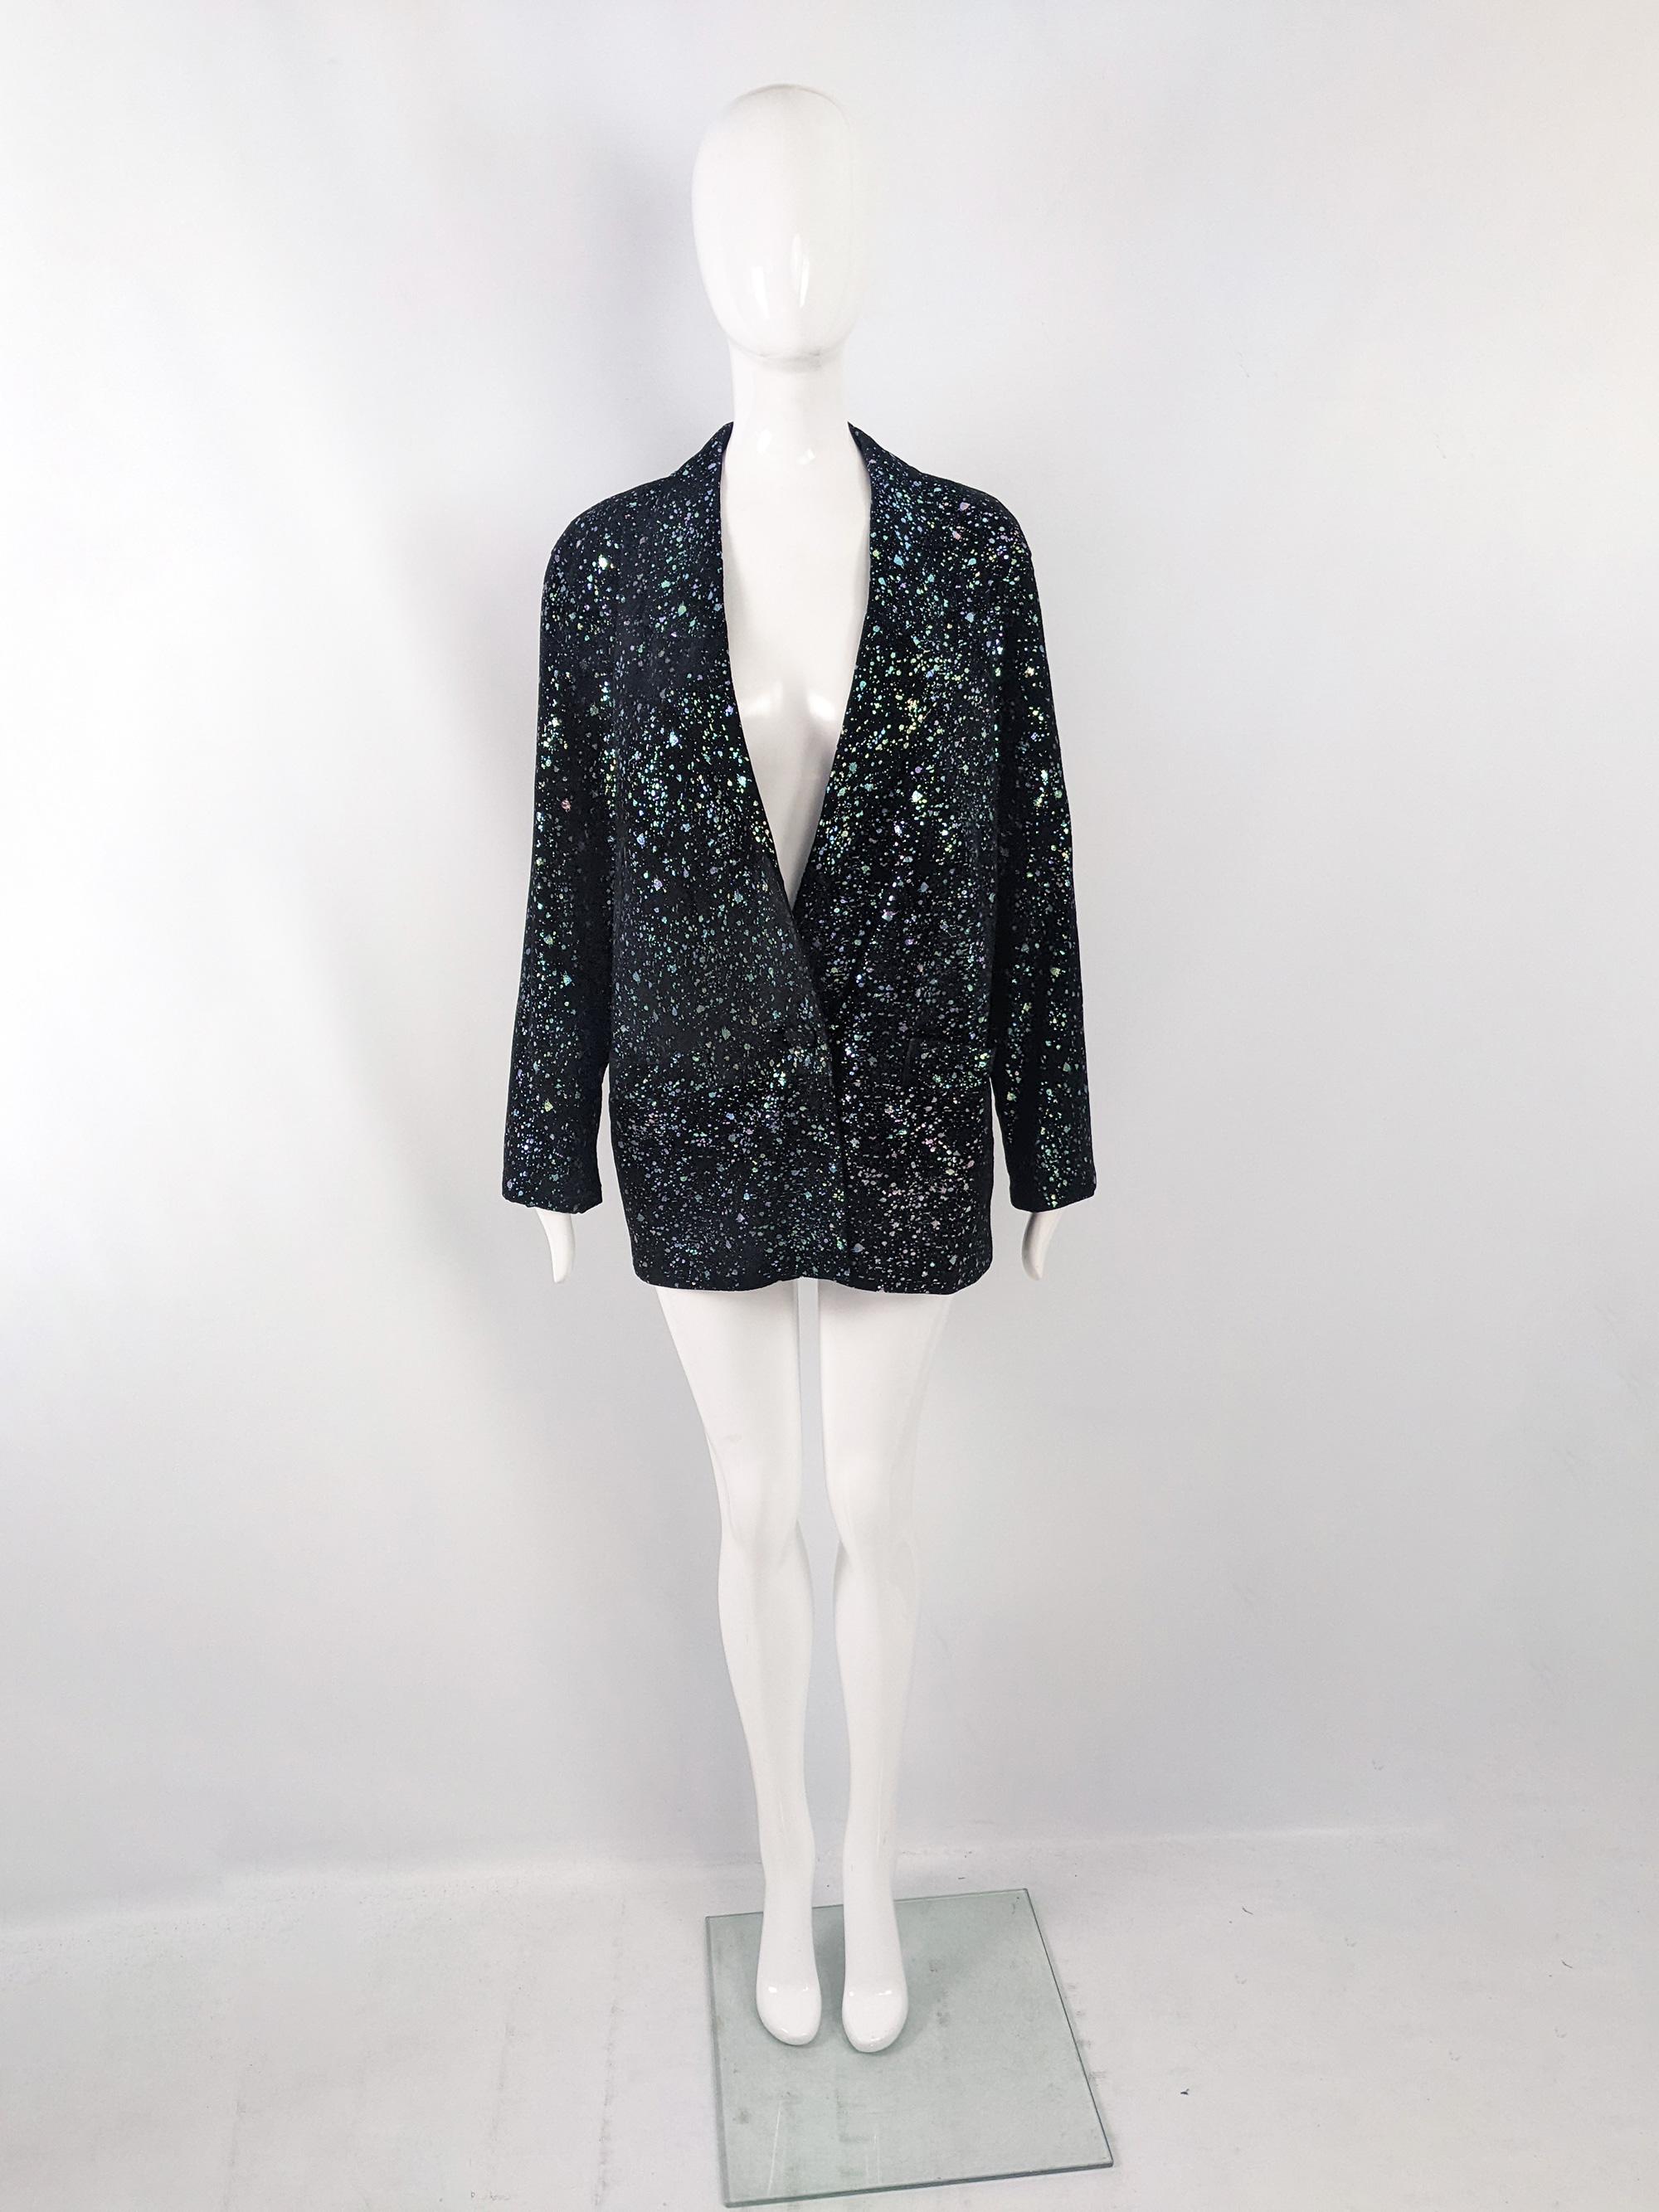 An incredible and rare vintage womens suede jacket from the 80s by quality British fashion leatherwear designer, Gavin Brown. In a black suede with an incredible metallic splatter print throughout and an oversized, boxy fit.

Size: Marked vintage UK